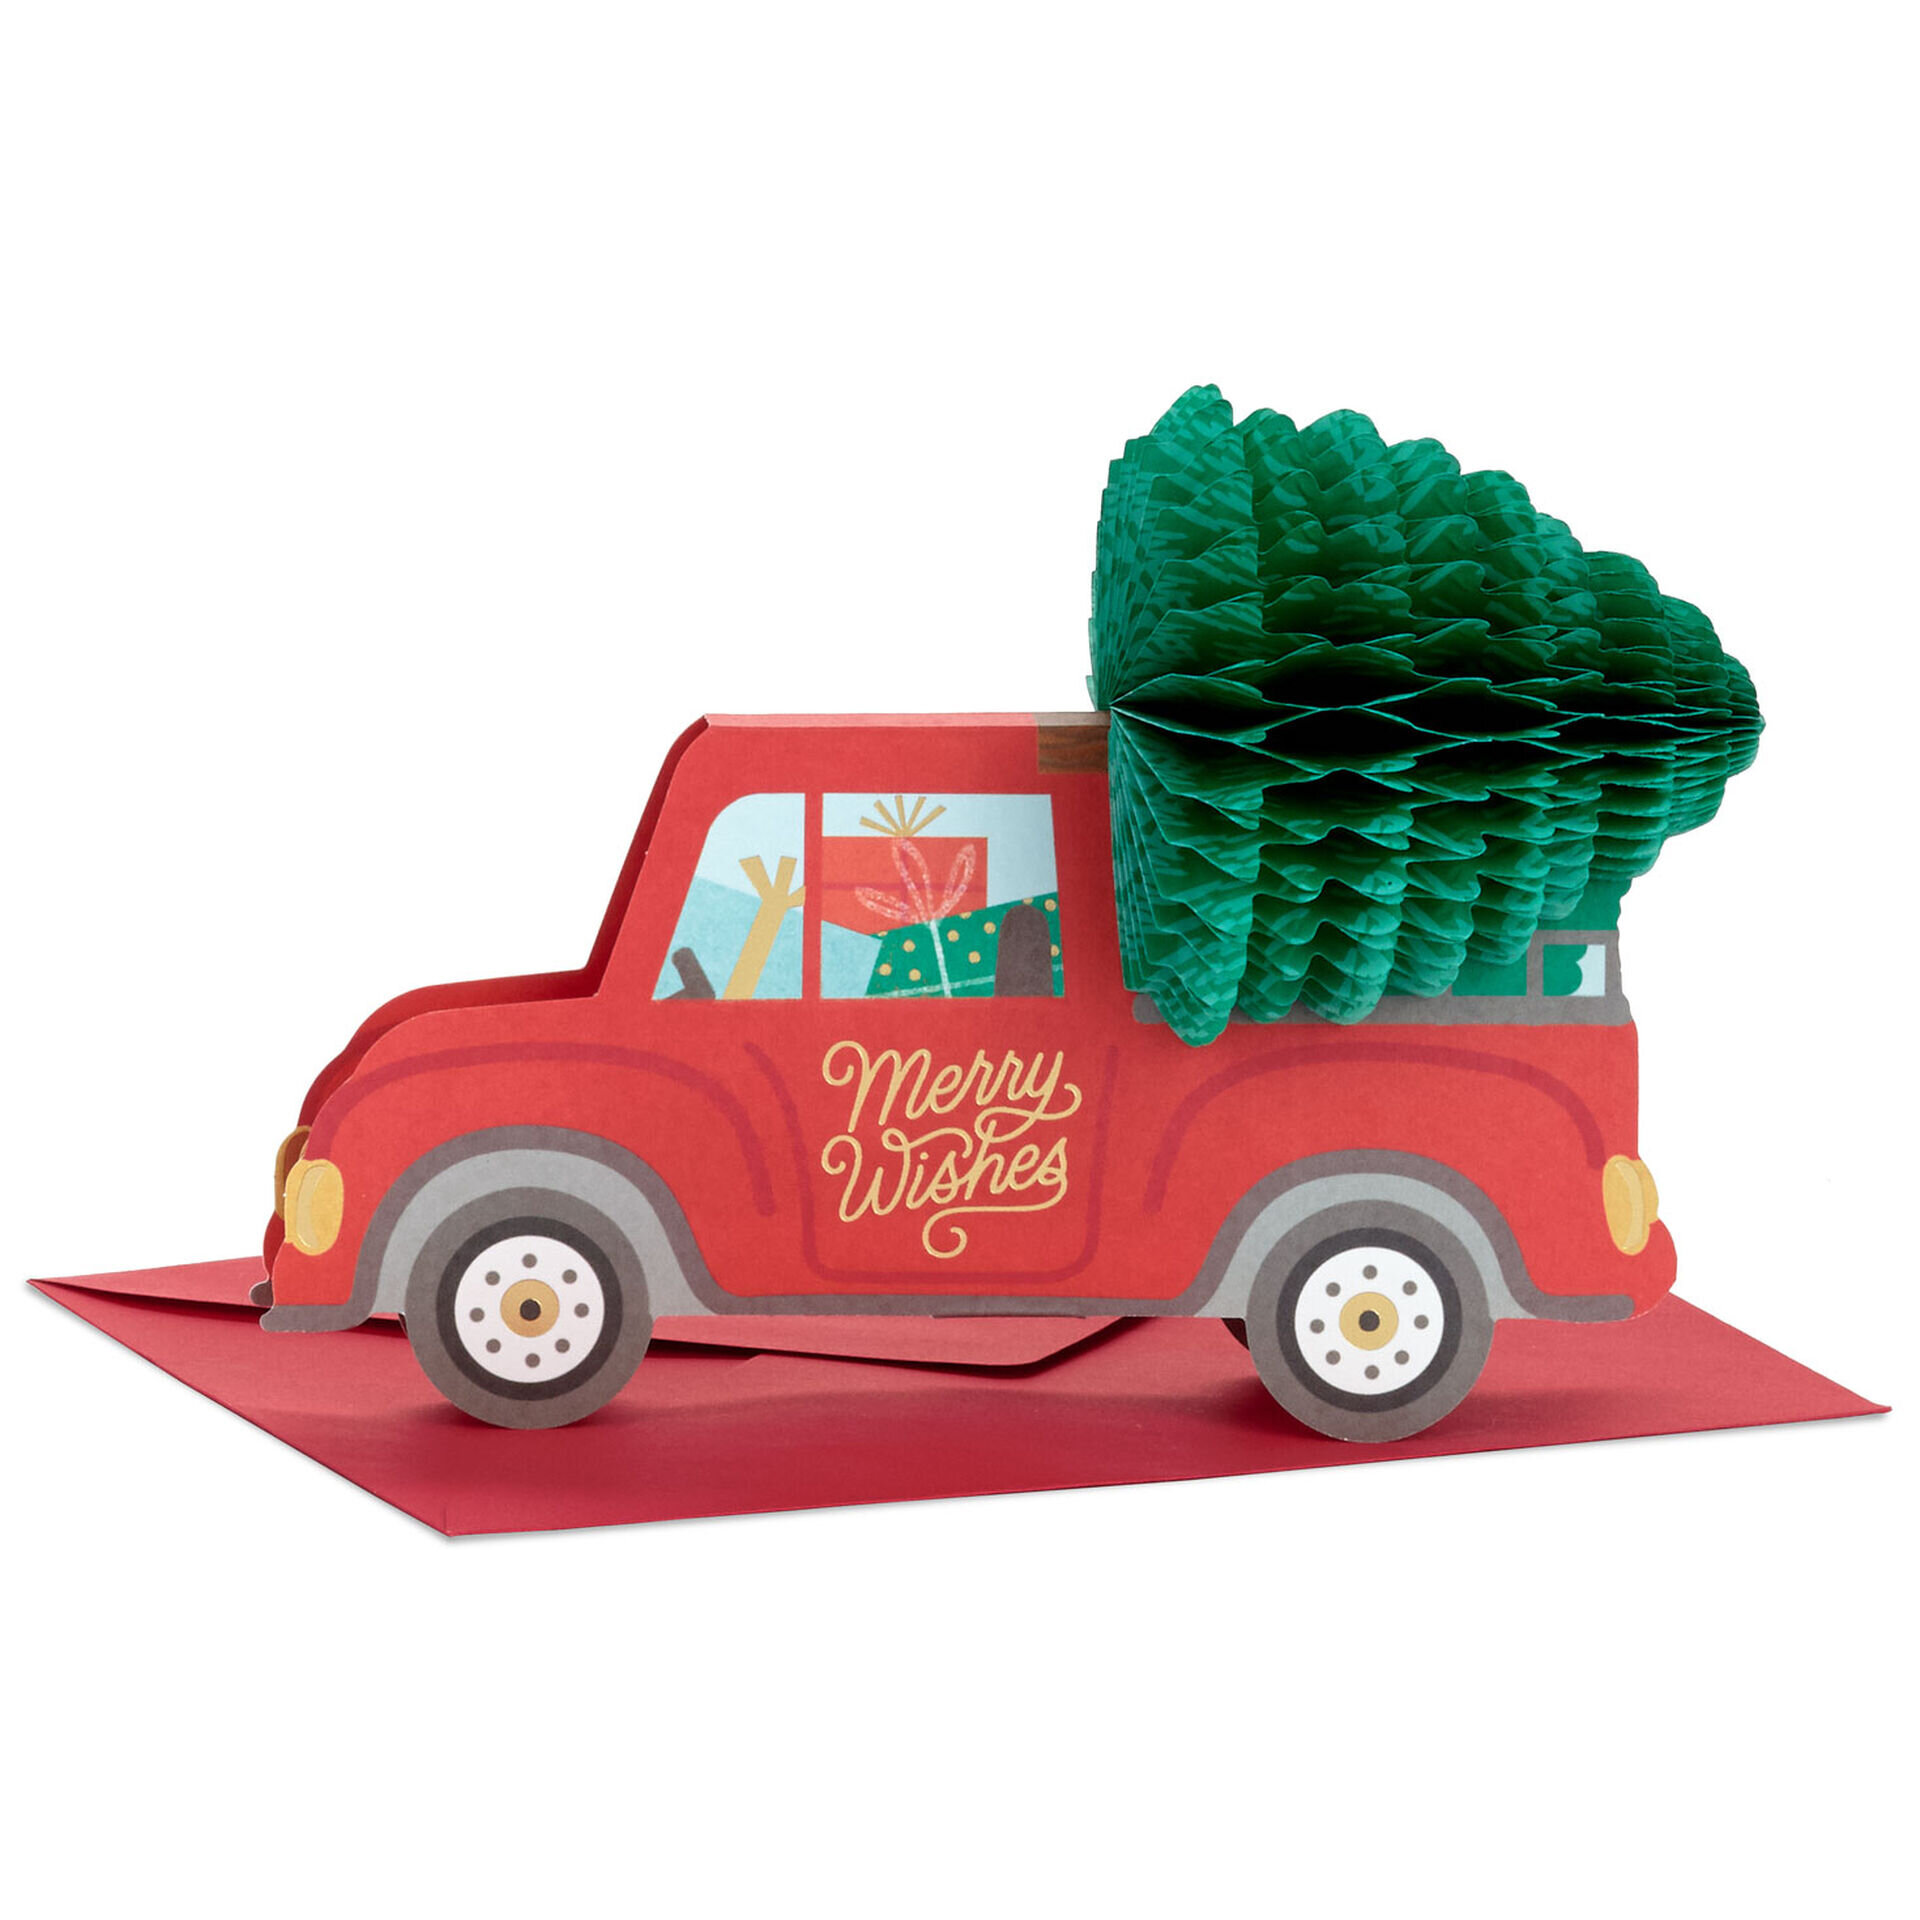 Red-Truck-With-Tree-Honeycomb-3D-PopUp-Christmas-Card_699XPJ5174_01.jpg